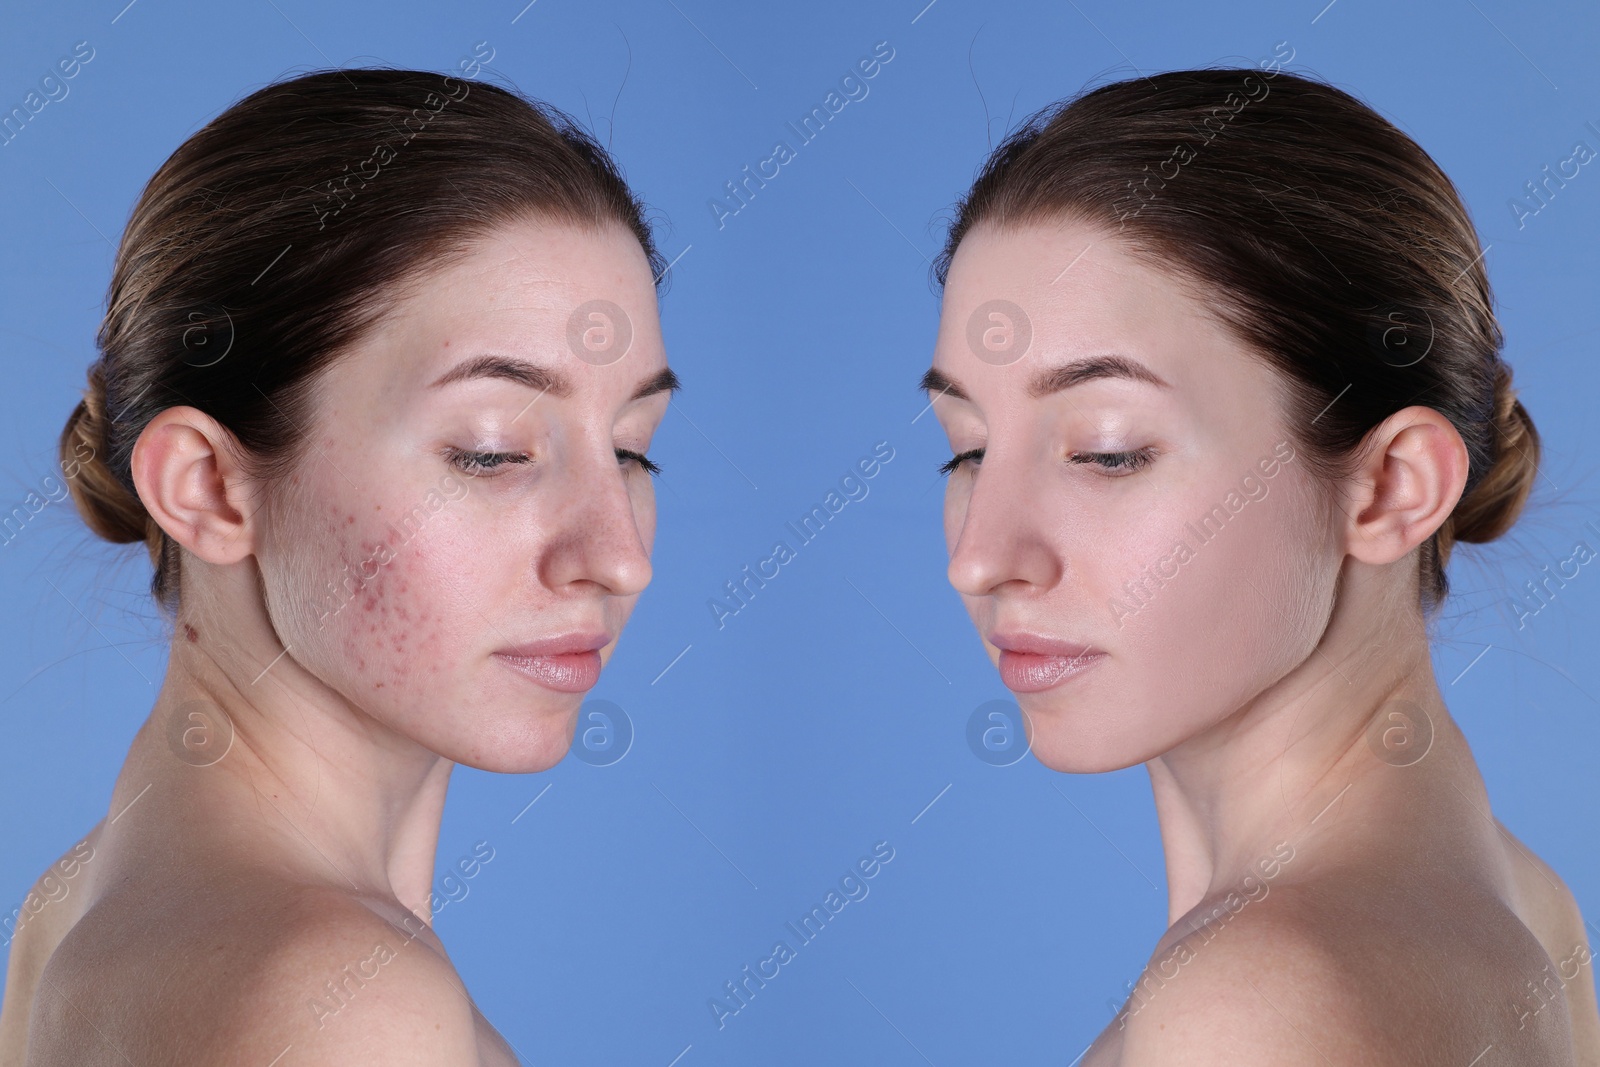 Image of Acne problem. Young woman before and after treatment on blue background, collage of photos